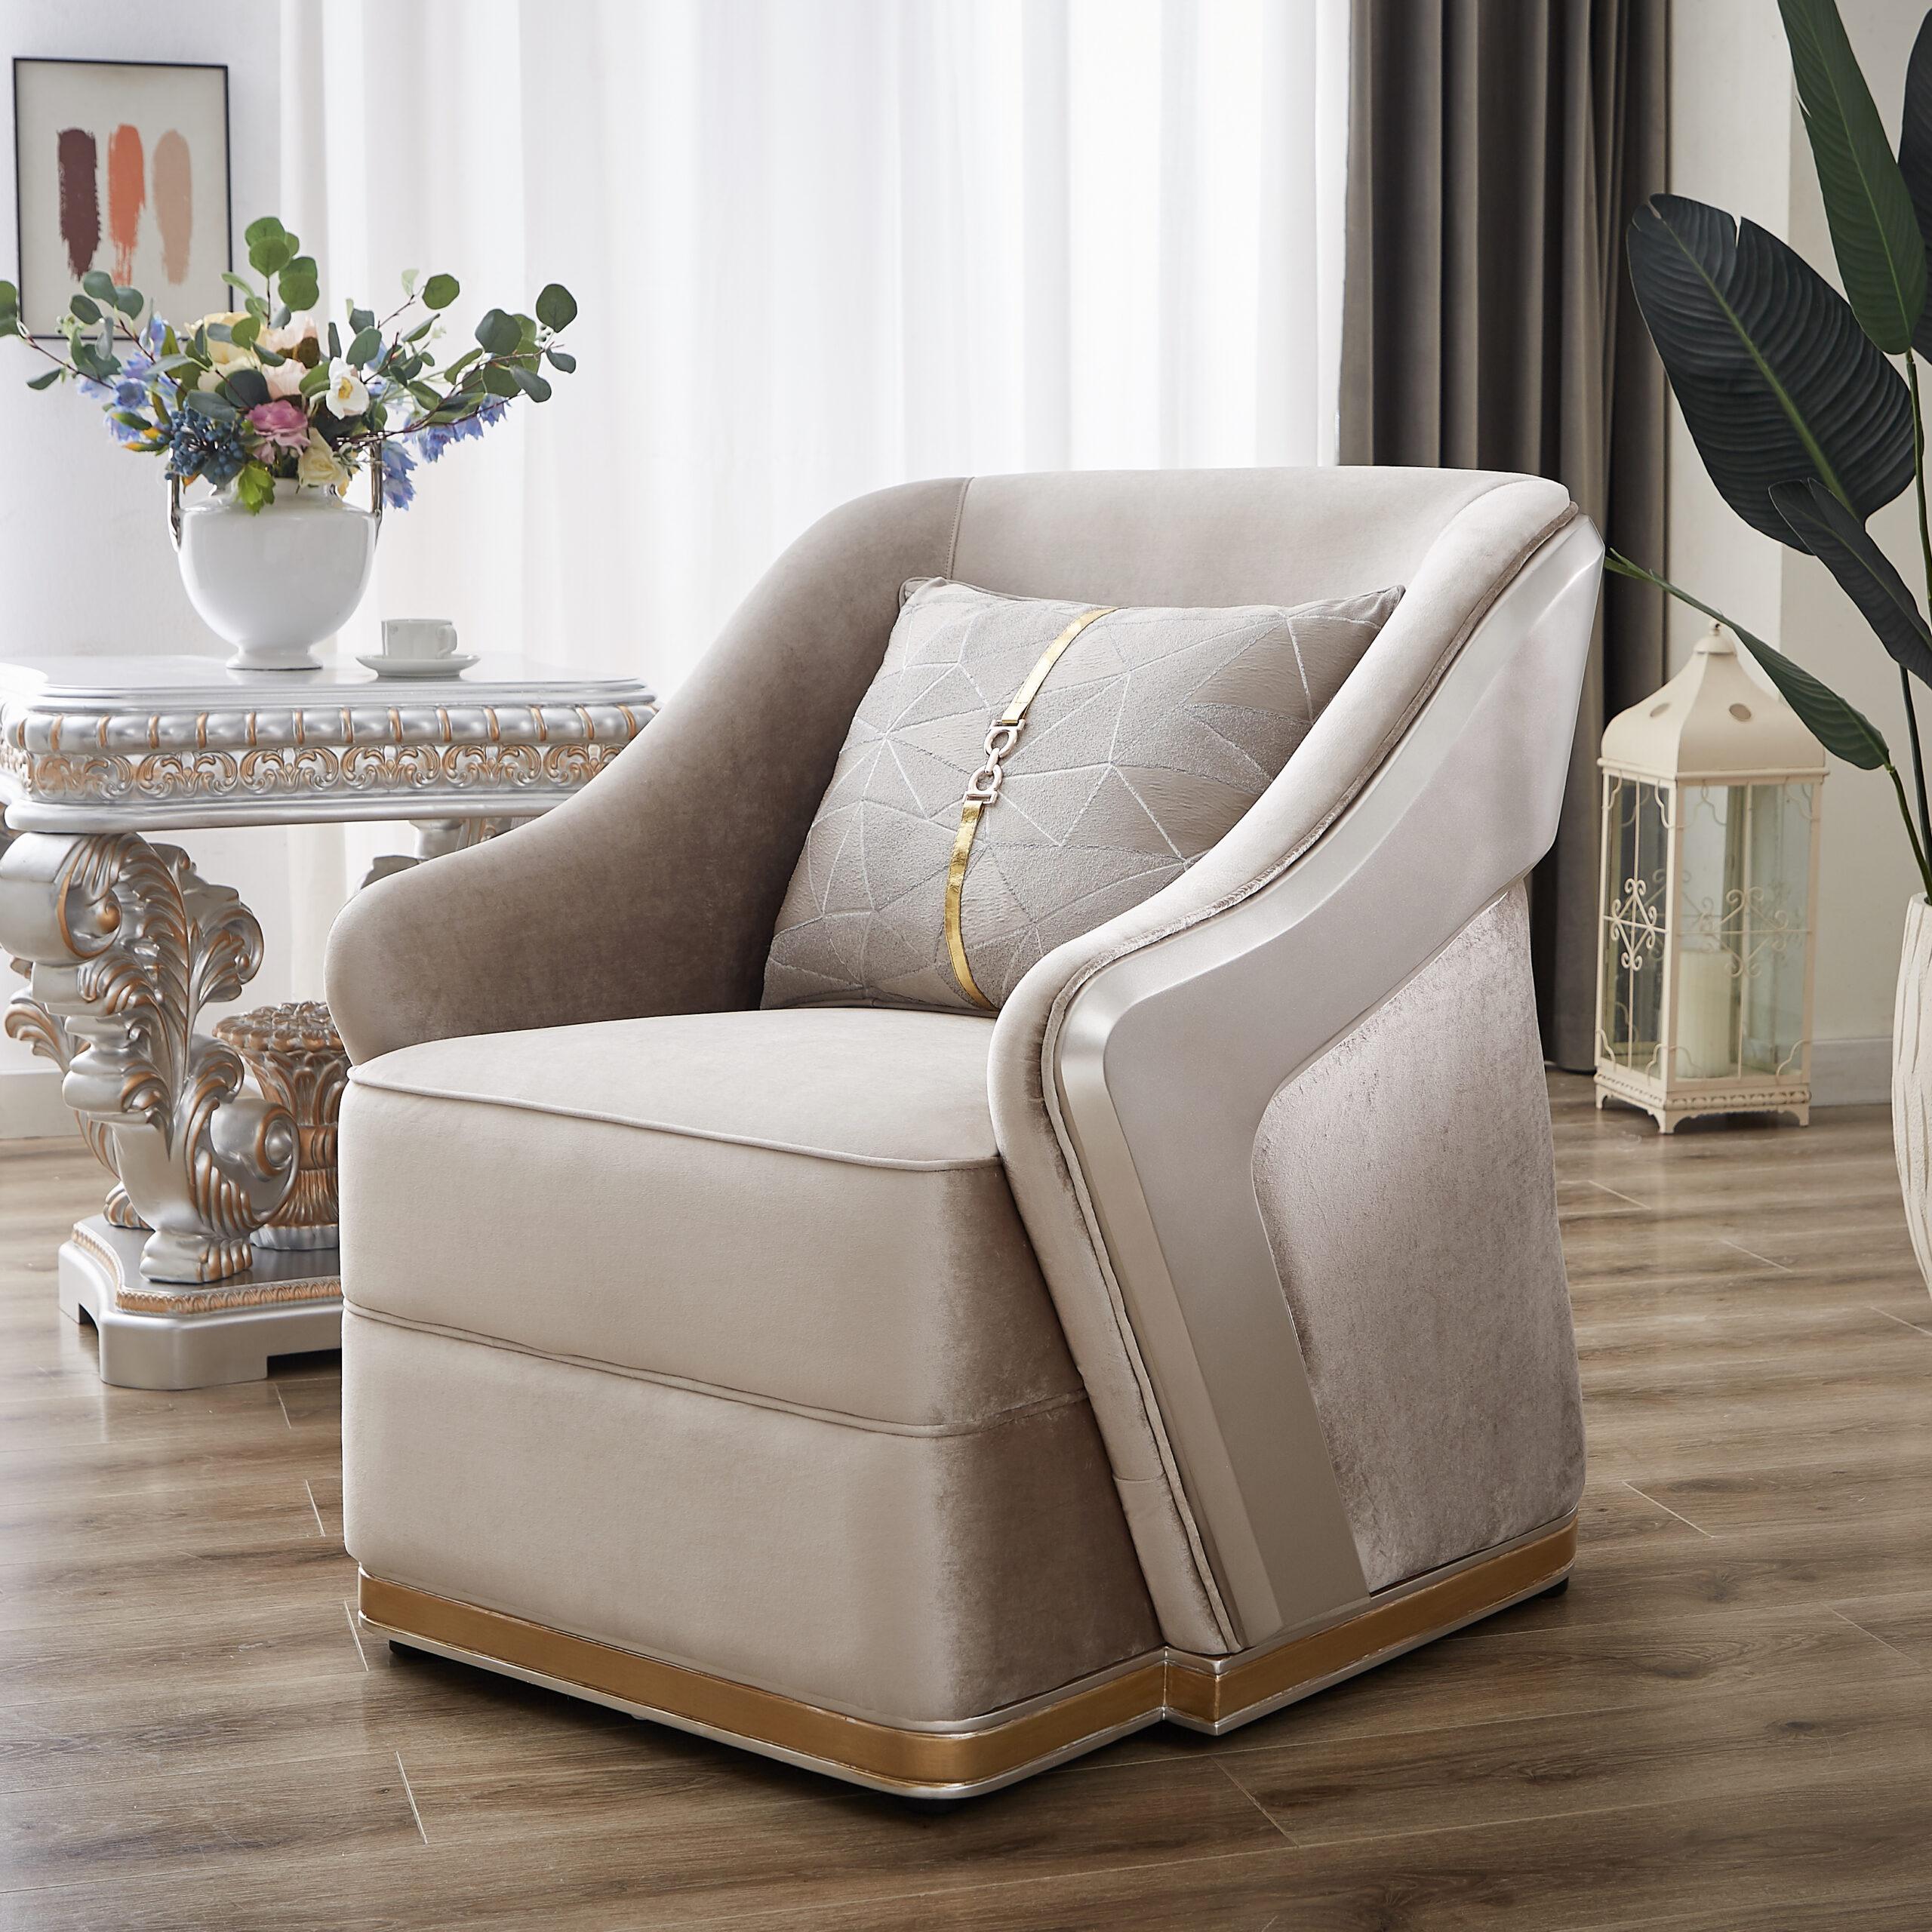 Classic, Traditional Chair HD-9022 Chair HD-C9022 HD-C9022 in Gold, Beige Fabric